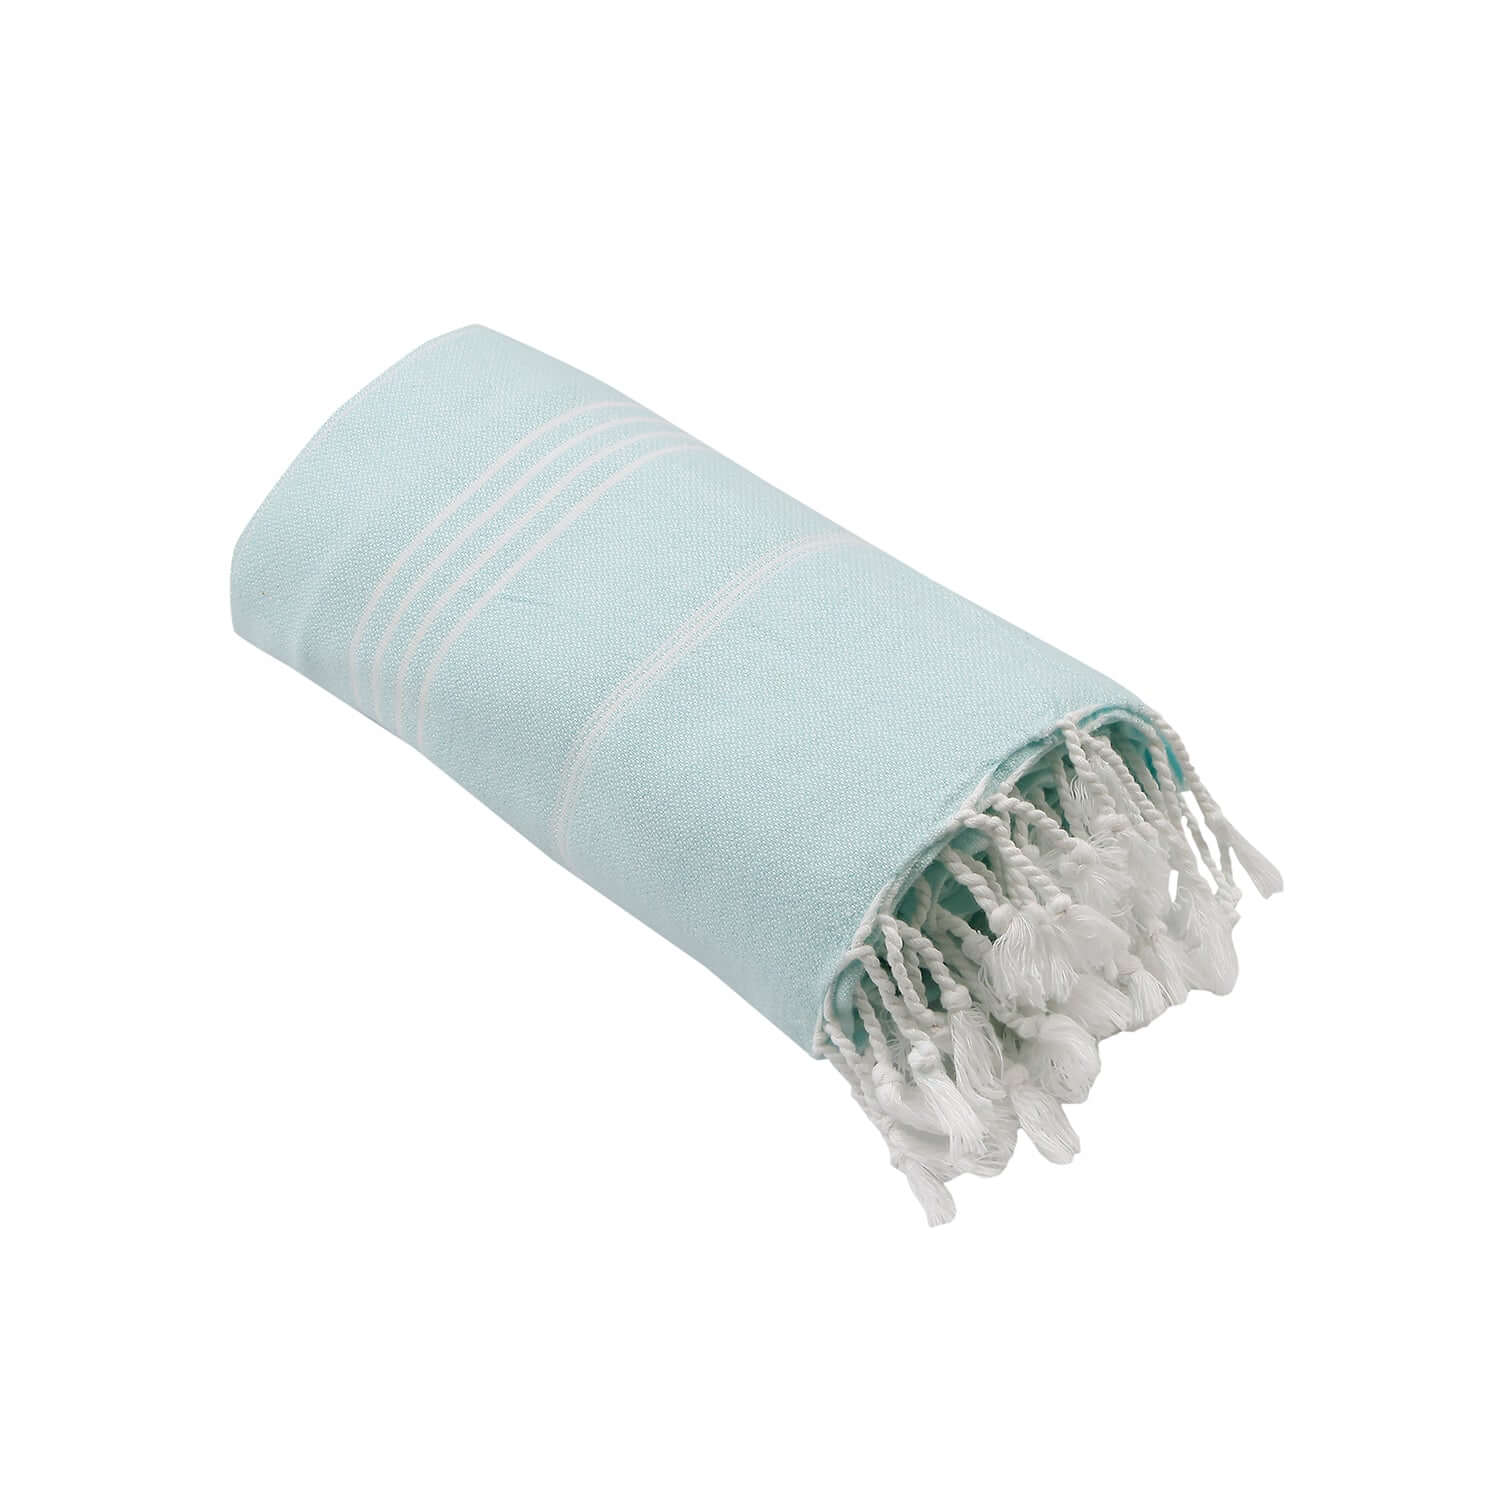 Rolled-up Loom Legacy aqua beach towel with subtle white vertical stripes. One end of the towel showcases fringed white tassels, all presented against a white background.